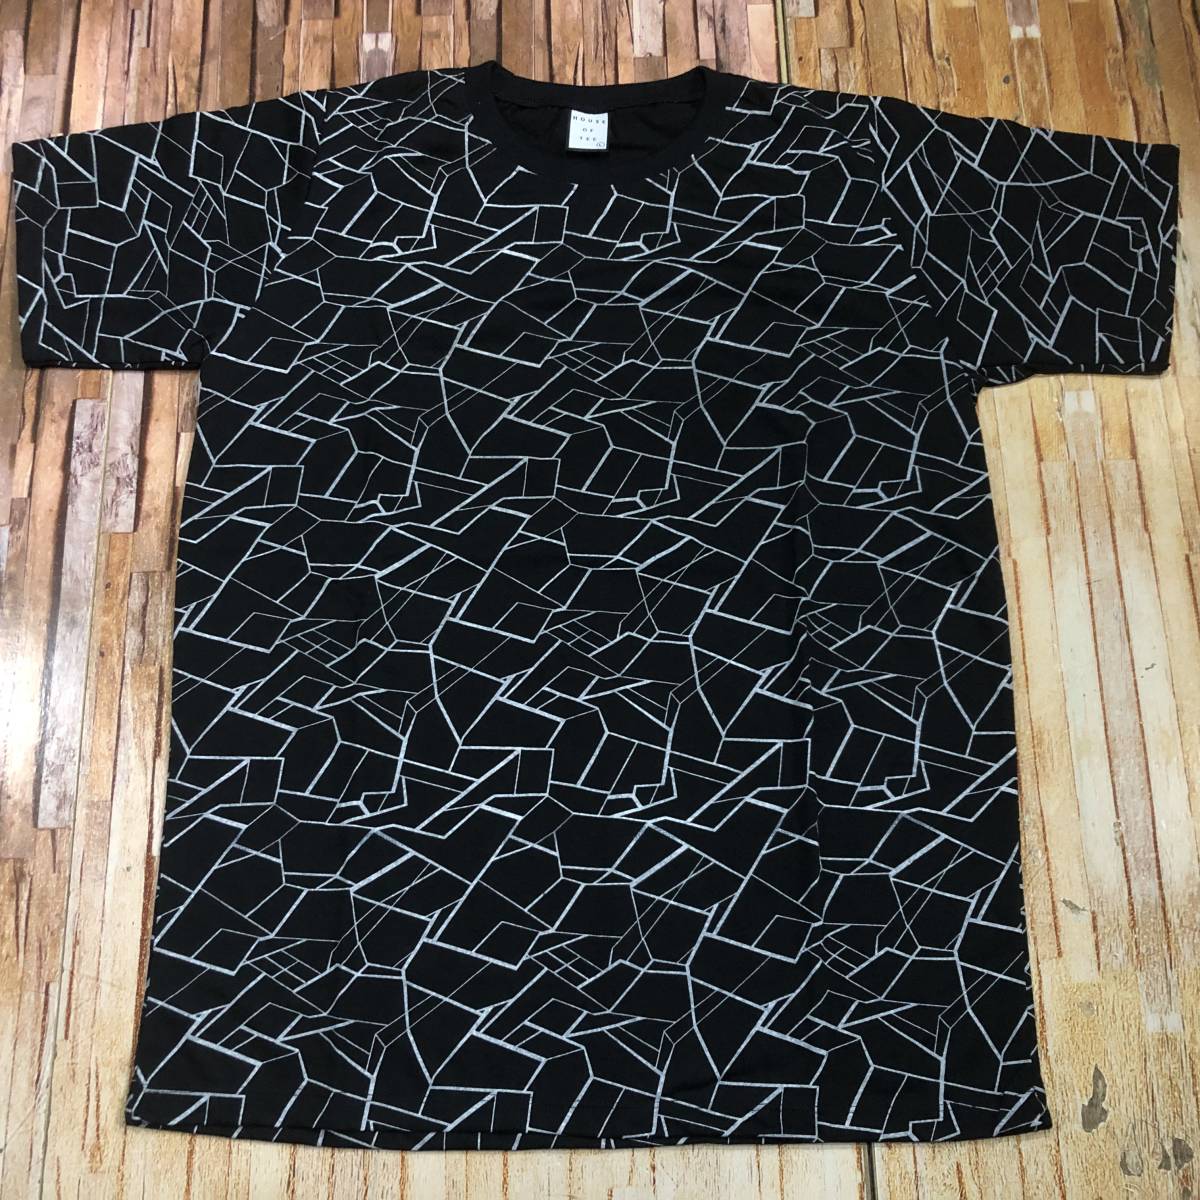 Brand new, Buy it now, Click post shipping, 'HOUSE OF TEE' from Bangkok, hand-drawn geometric pattern-like monochrome allover print T-shirt, black, M, M size, round neck, patterned